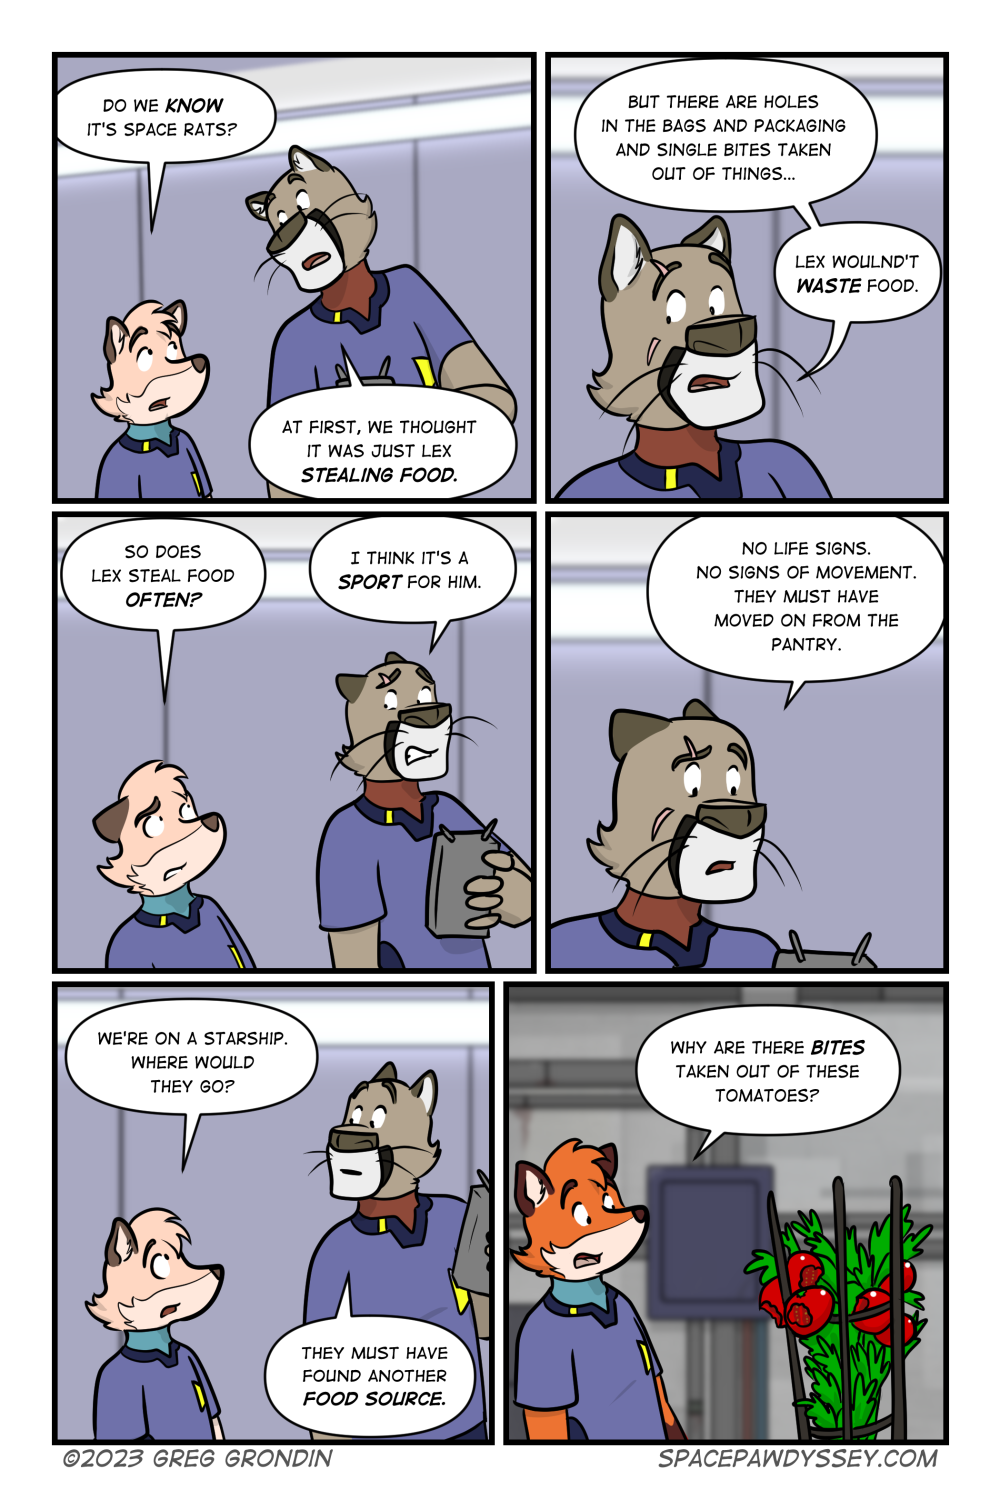 Space Pawdyssey #613